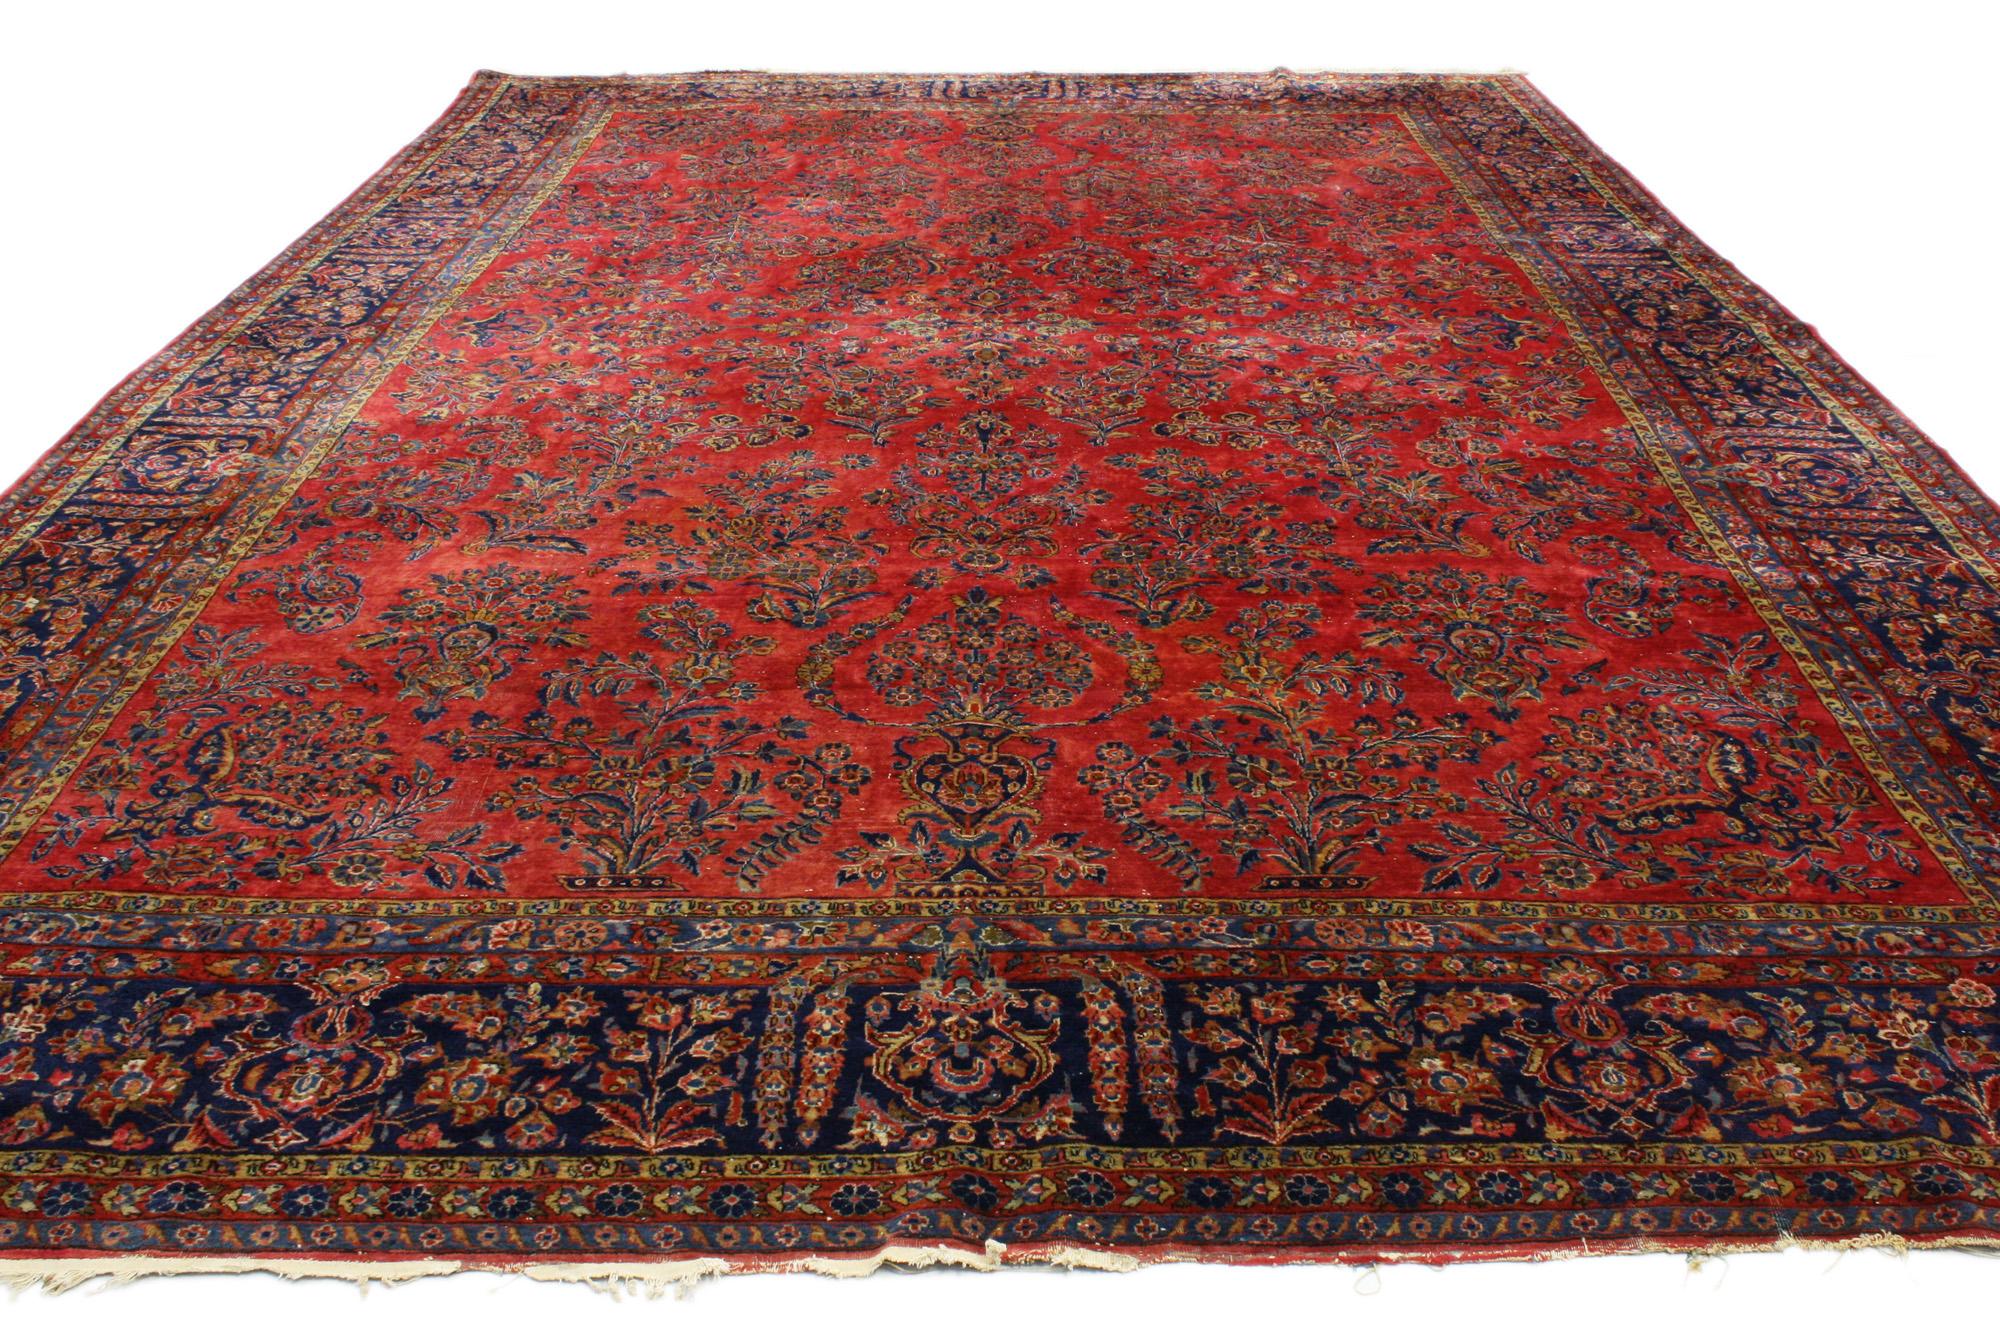 Hand-Knotted Antique Persian Kashan Rug with Art Nouveau Style in Rich Jewel Tones